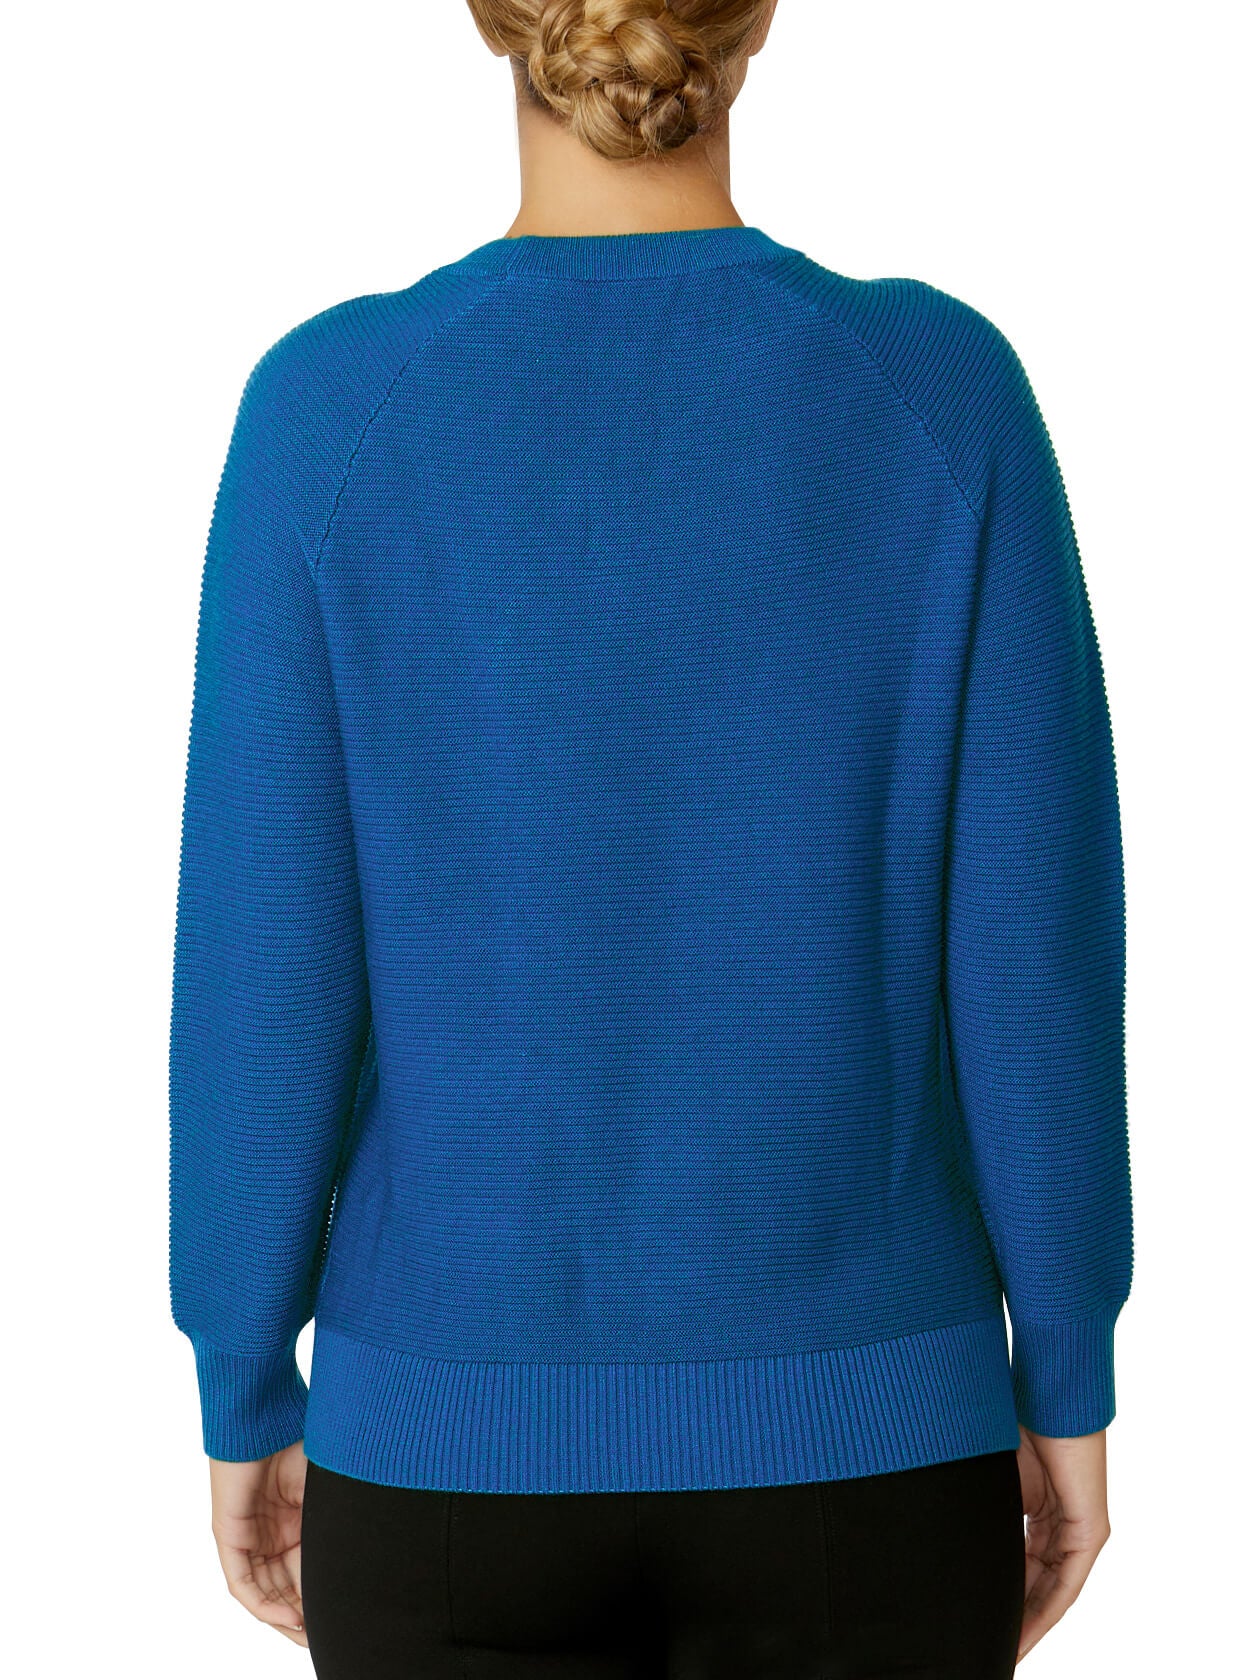 Alexis Blue Knit Sweater